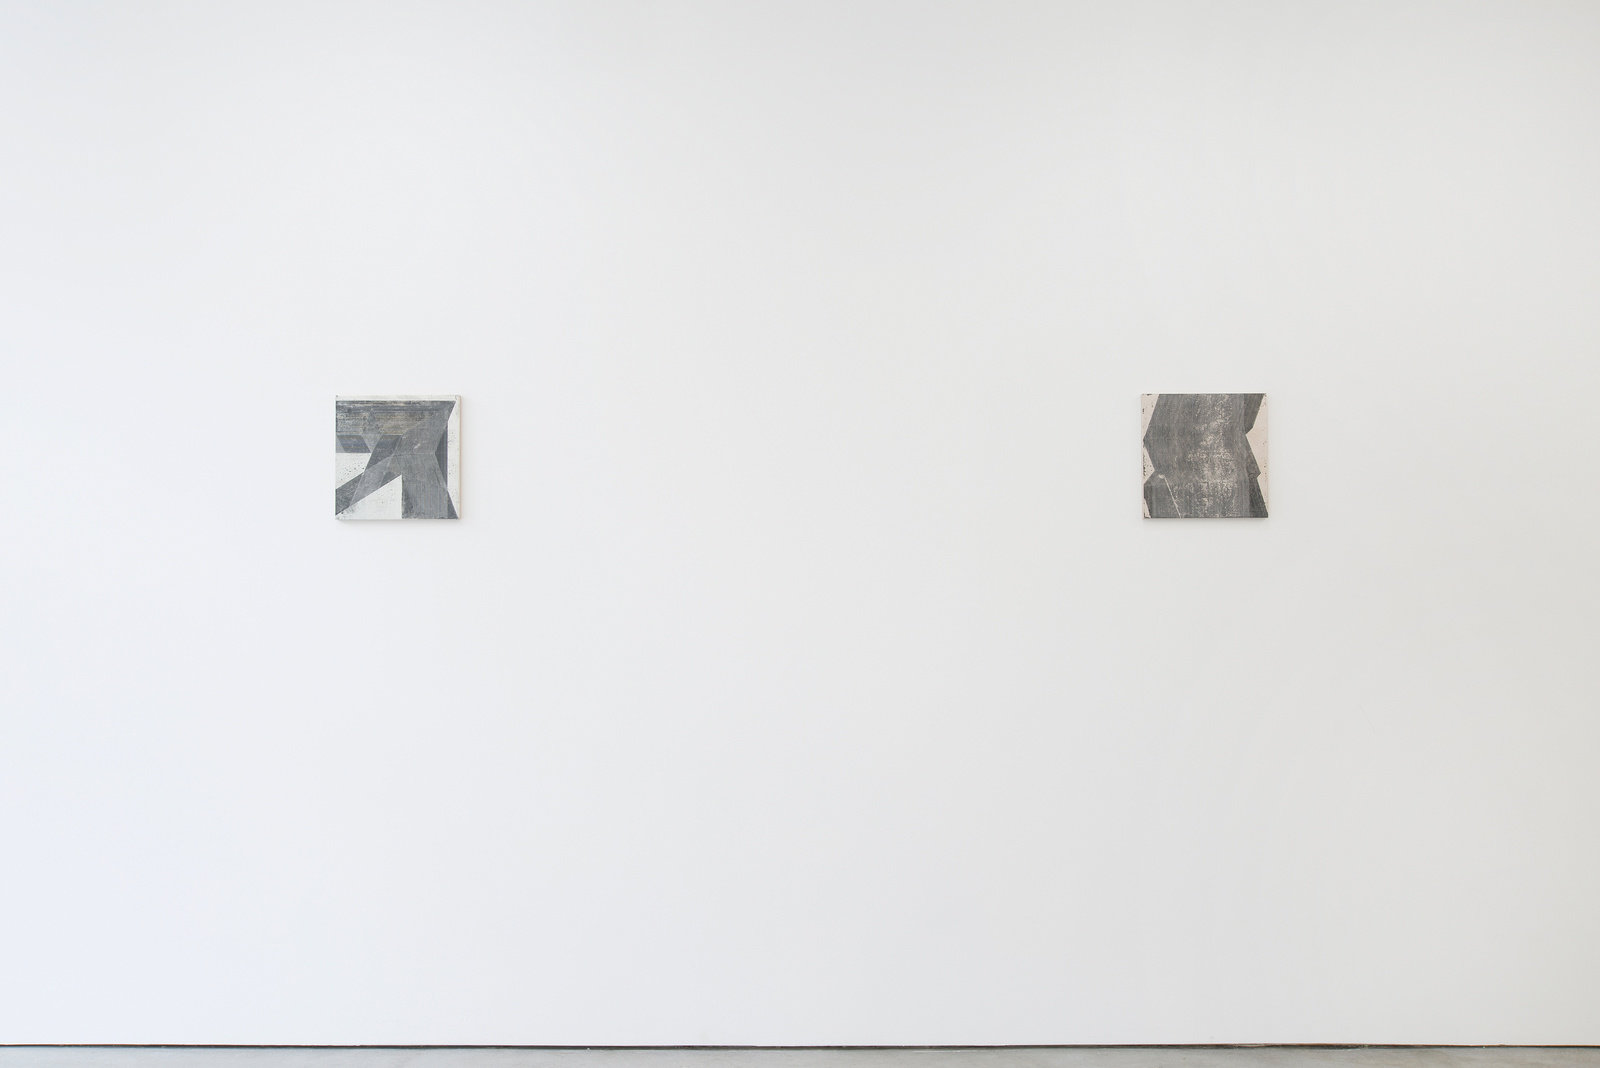 Grey noise, installation view 4, 2014